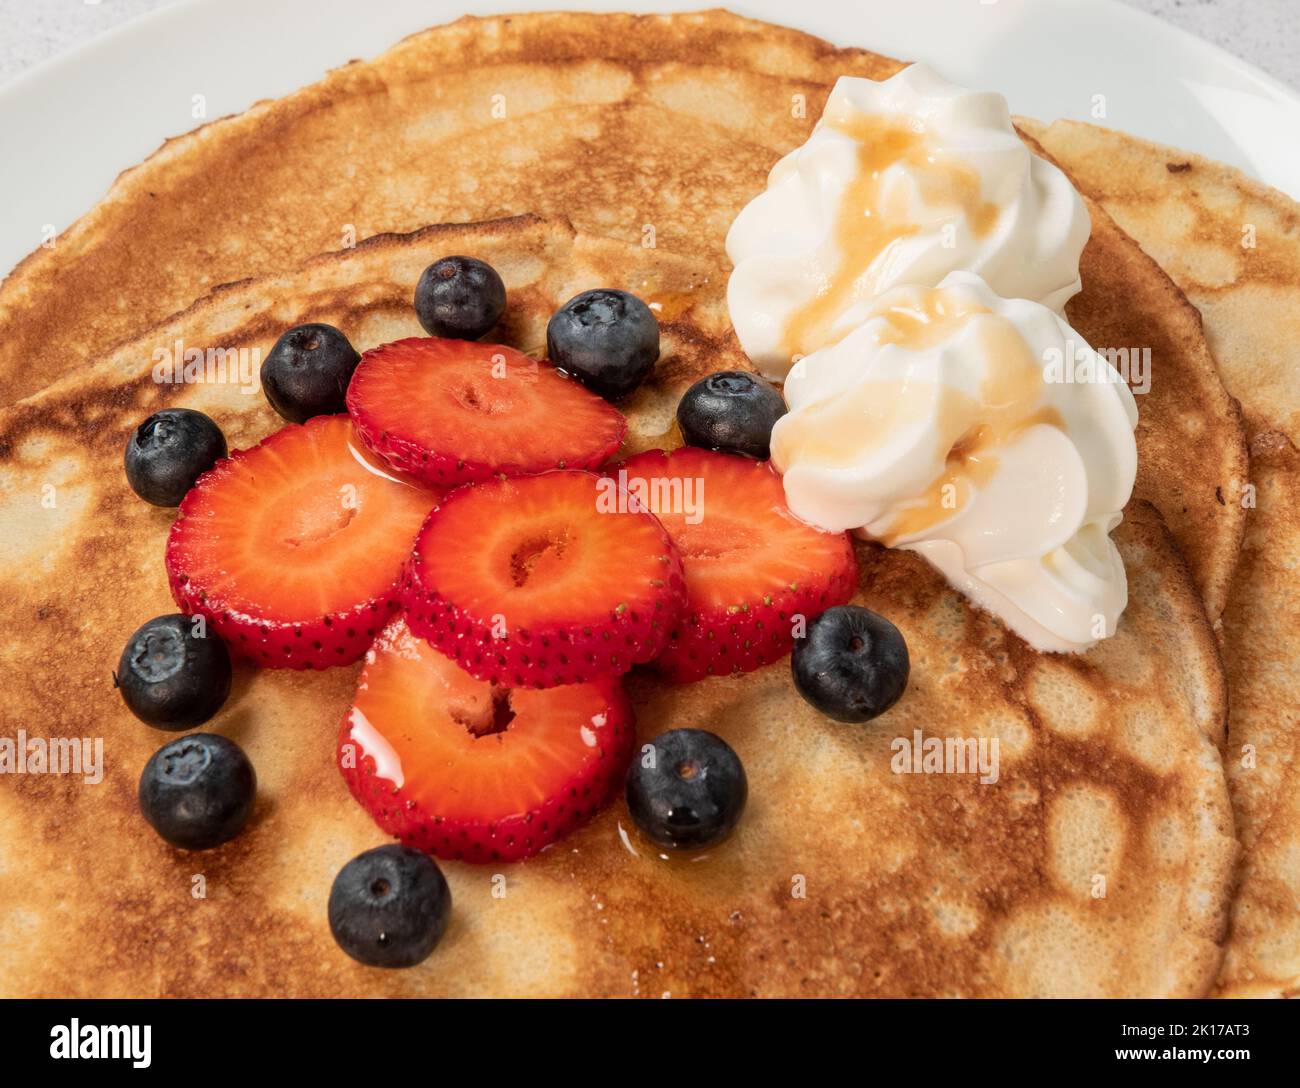 Pancakes with strawberries, blueberries, cream and maple syrup Stock Photo